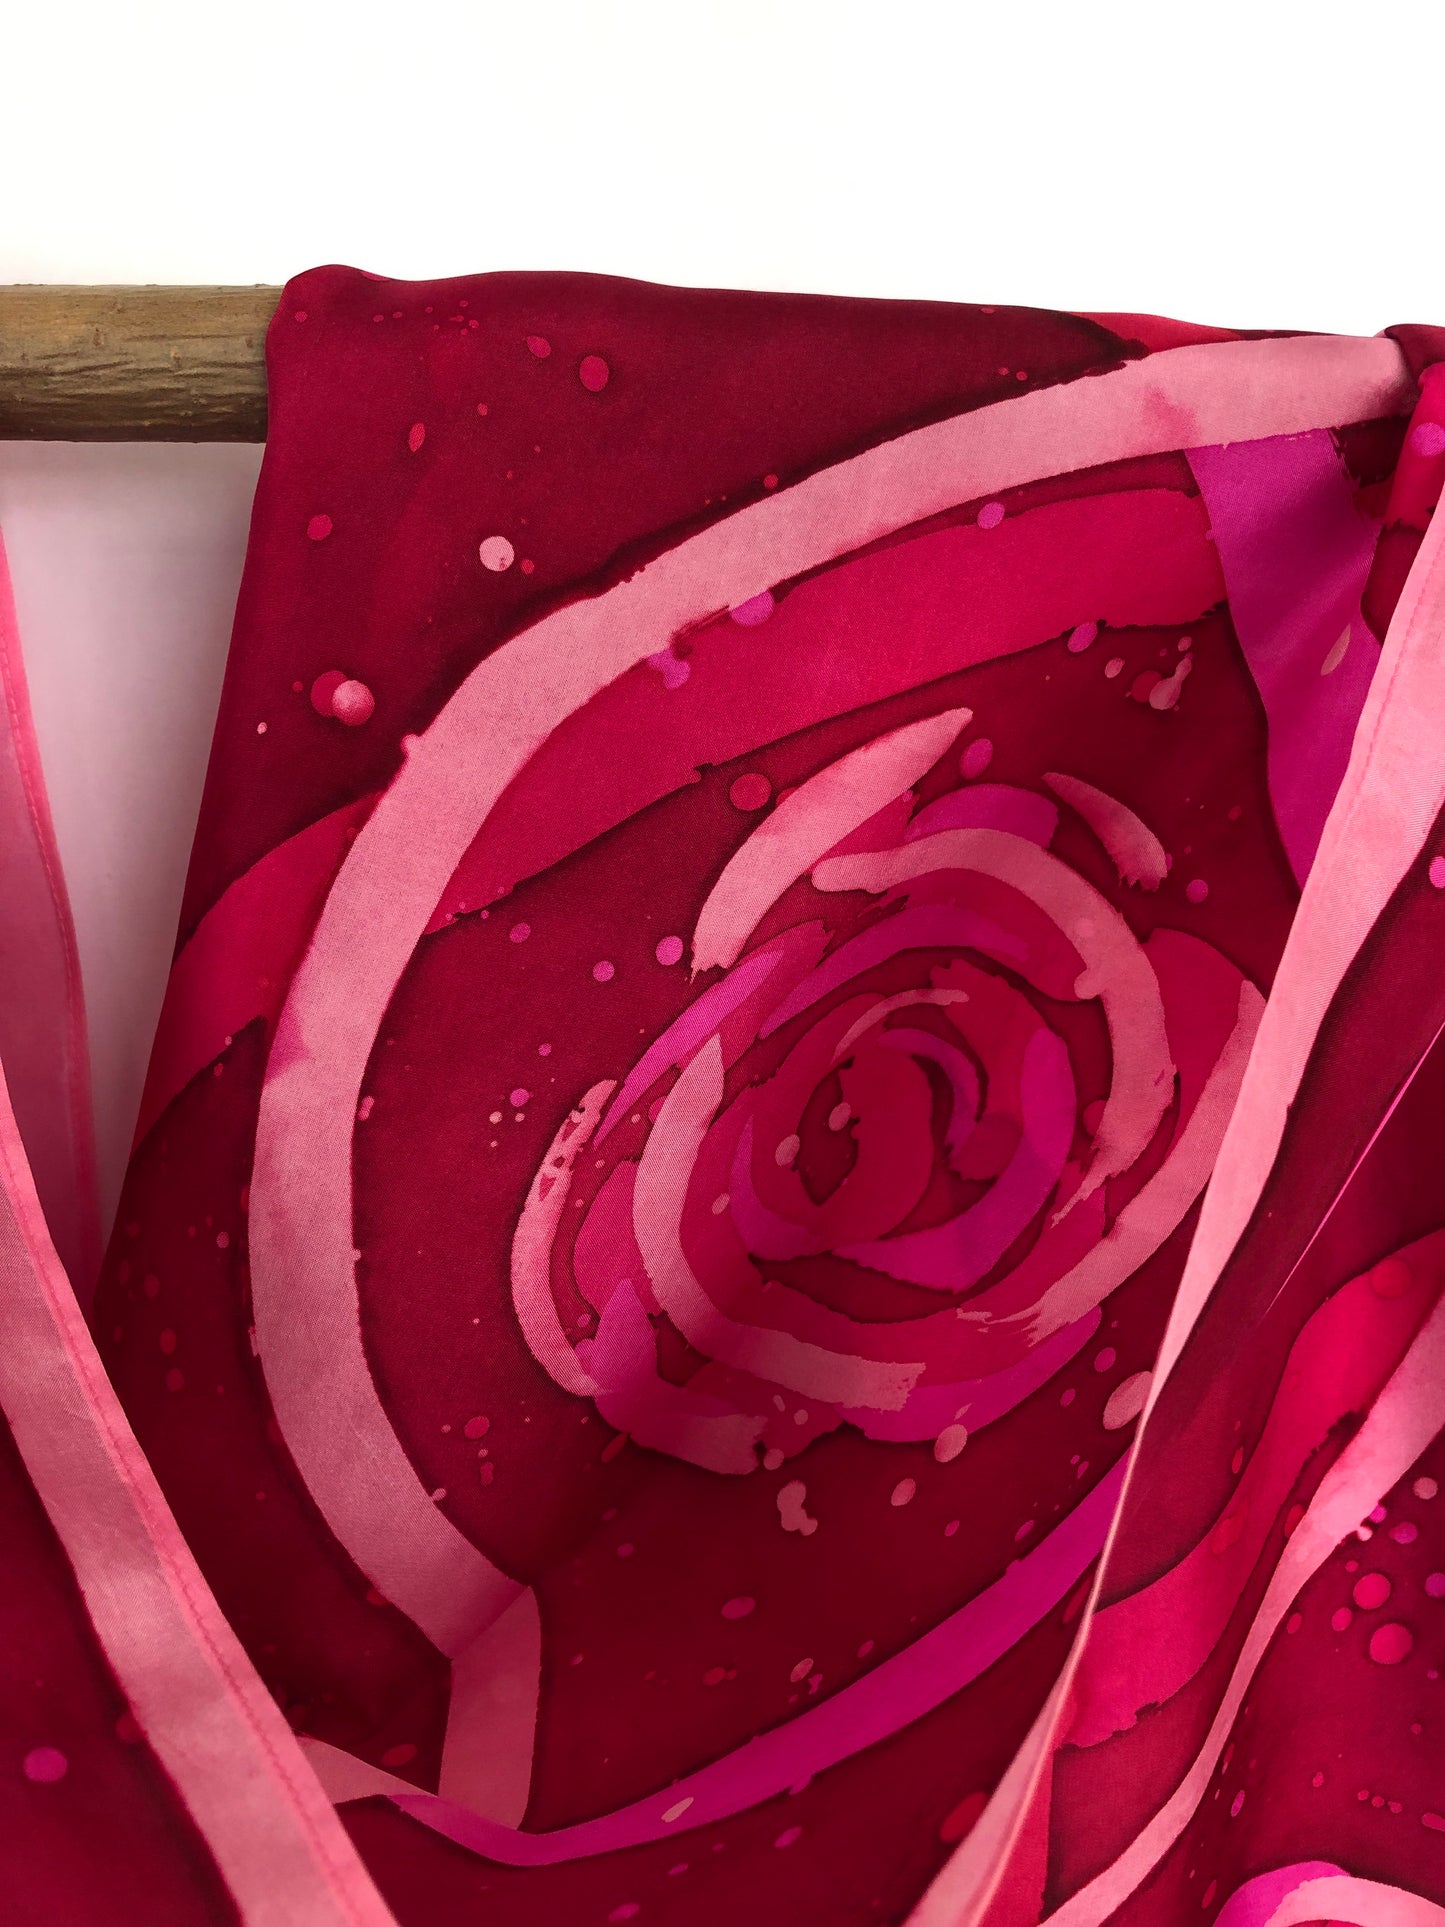 “Roses and Ribbons” -  Hand-dyed Silk Scarf - $120